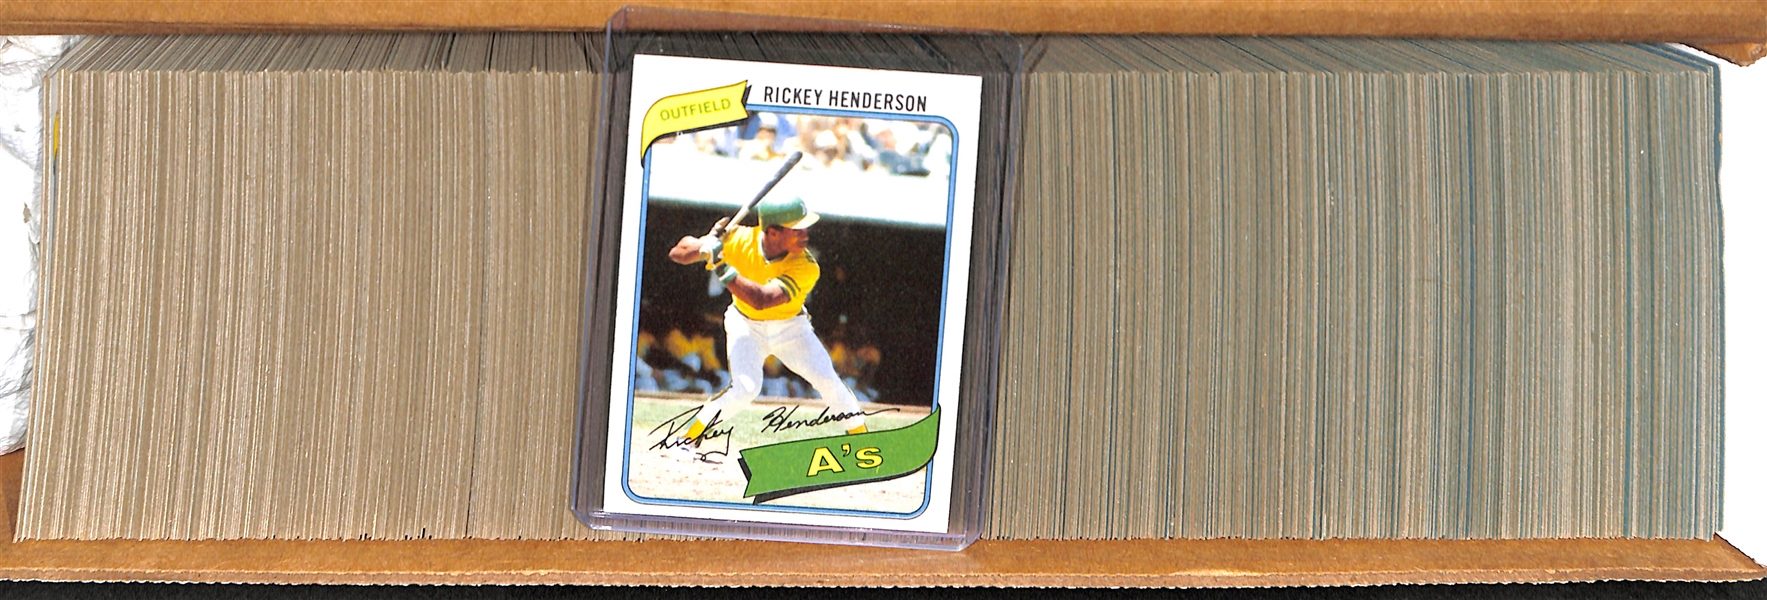 1980 Topps Baseball Complete Set of 726 Cards w. Rickey Henderson Rookie Card